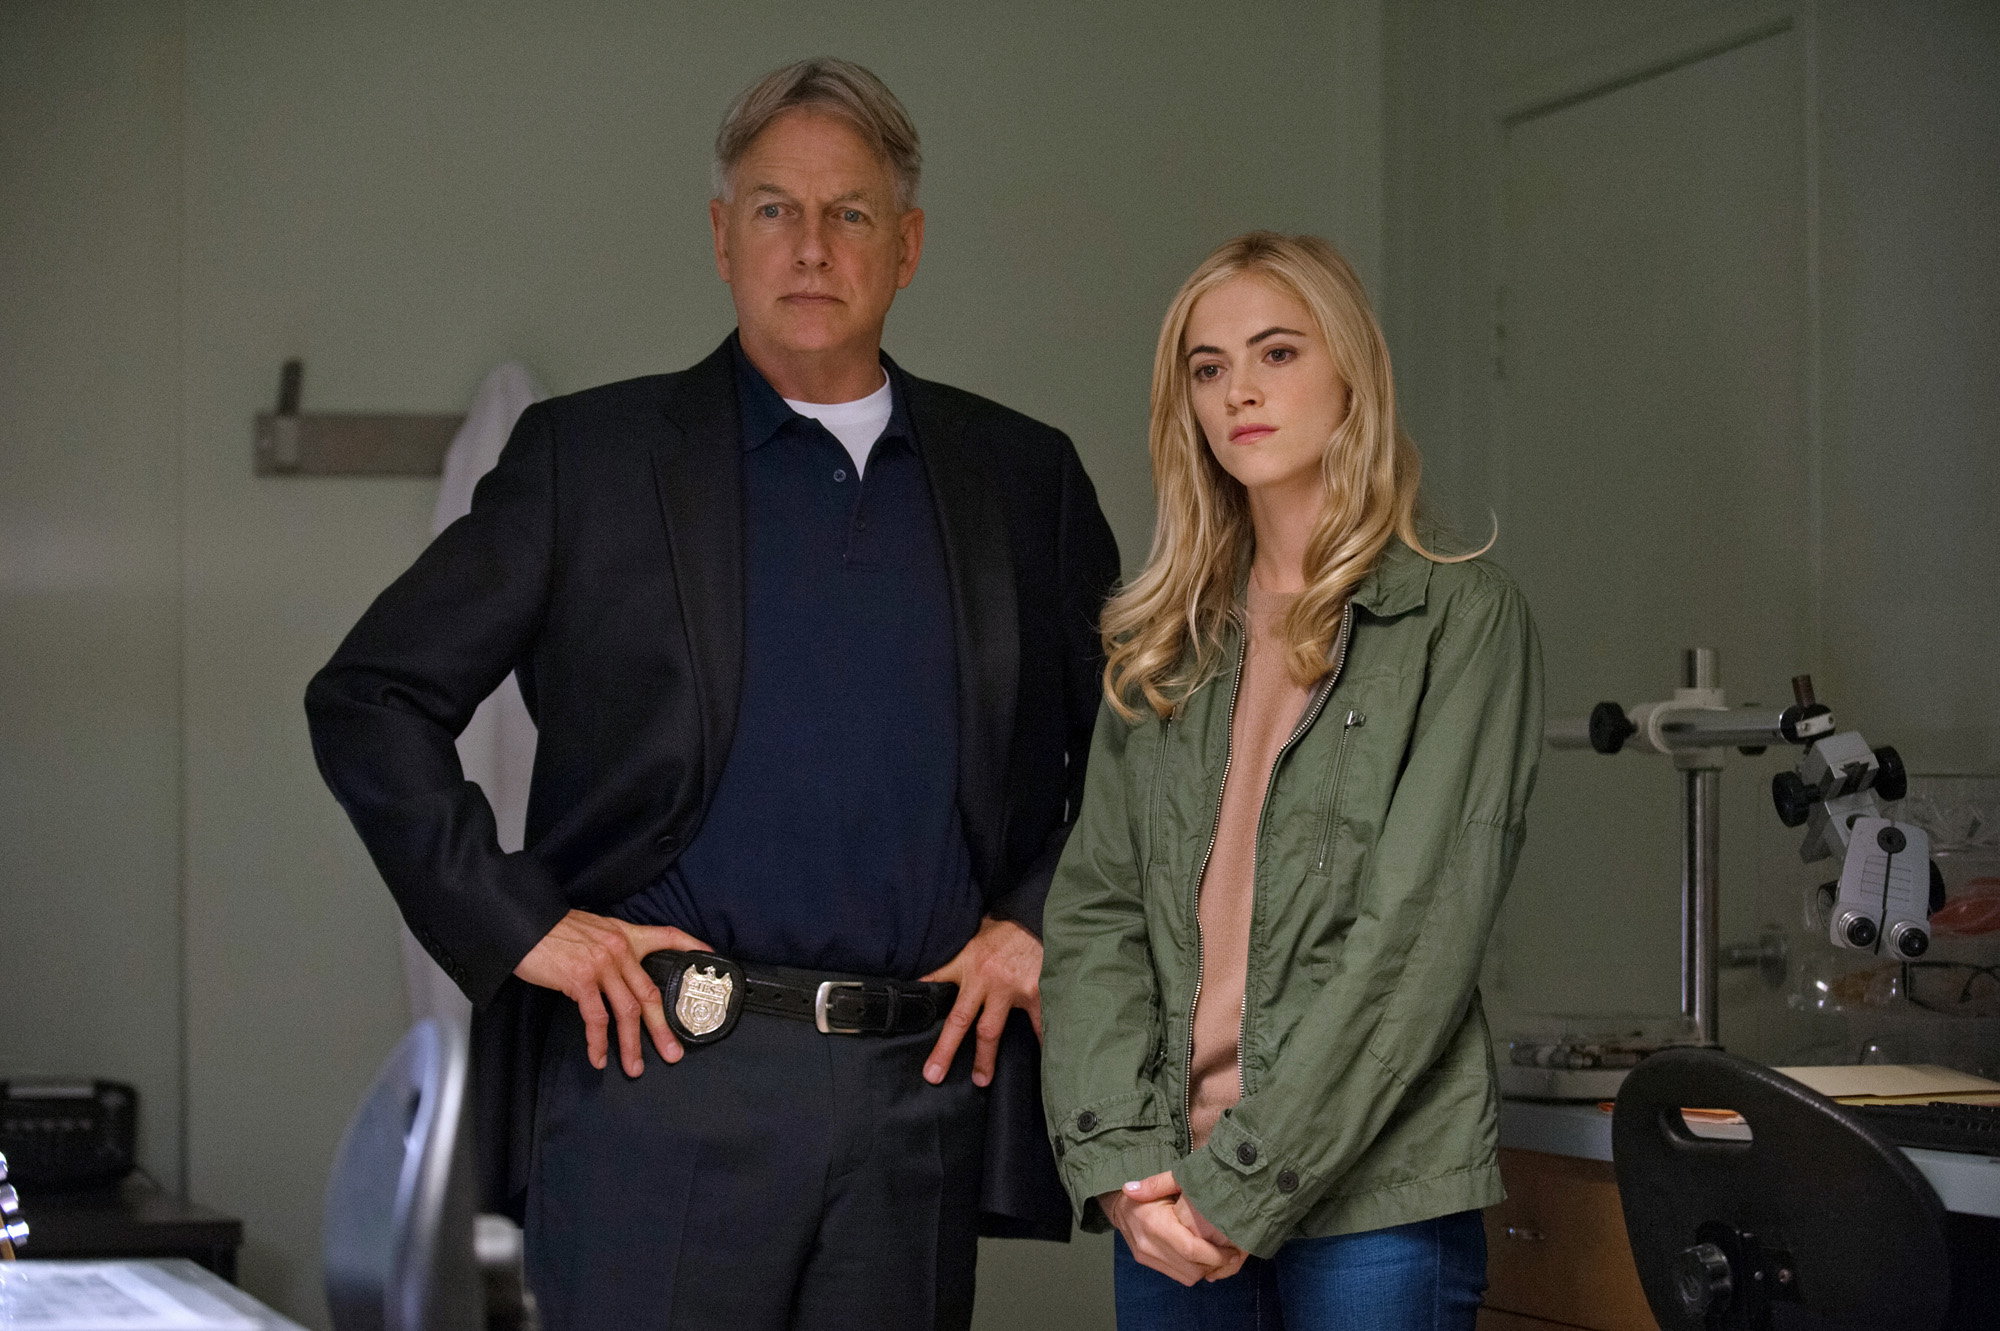 Mark Harmon and Emily Wickersham on an episode of "NCIS" on February 28, 2014 | Source: Getty Images